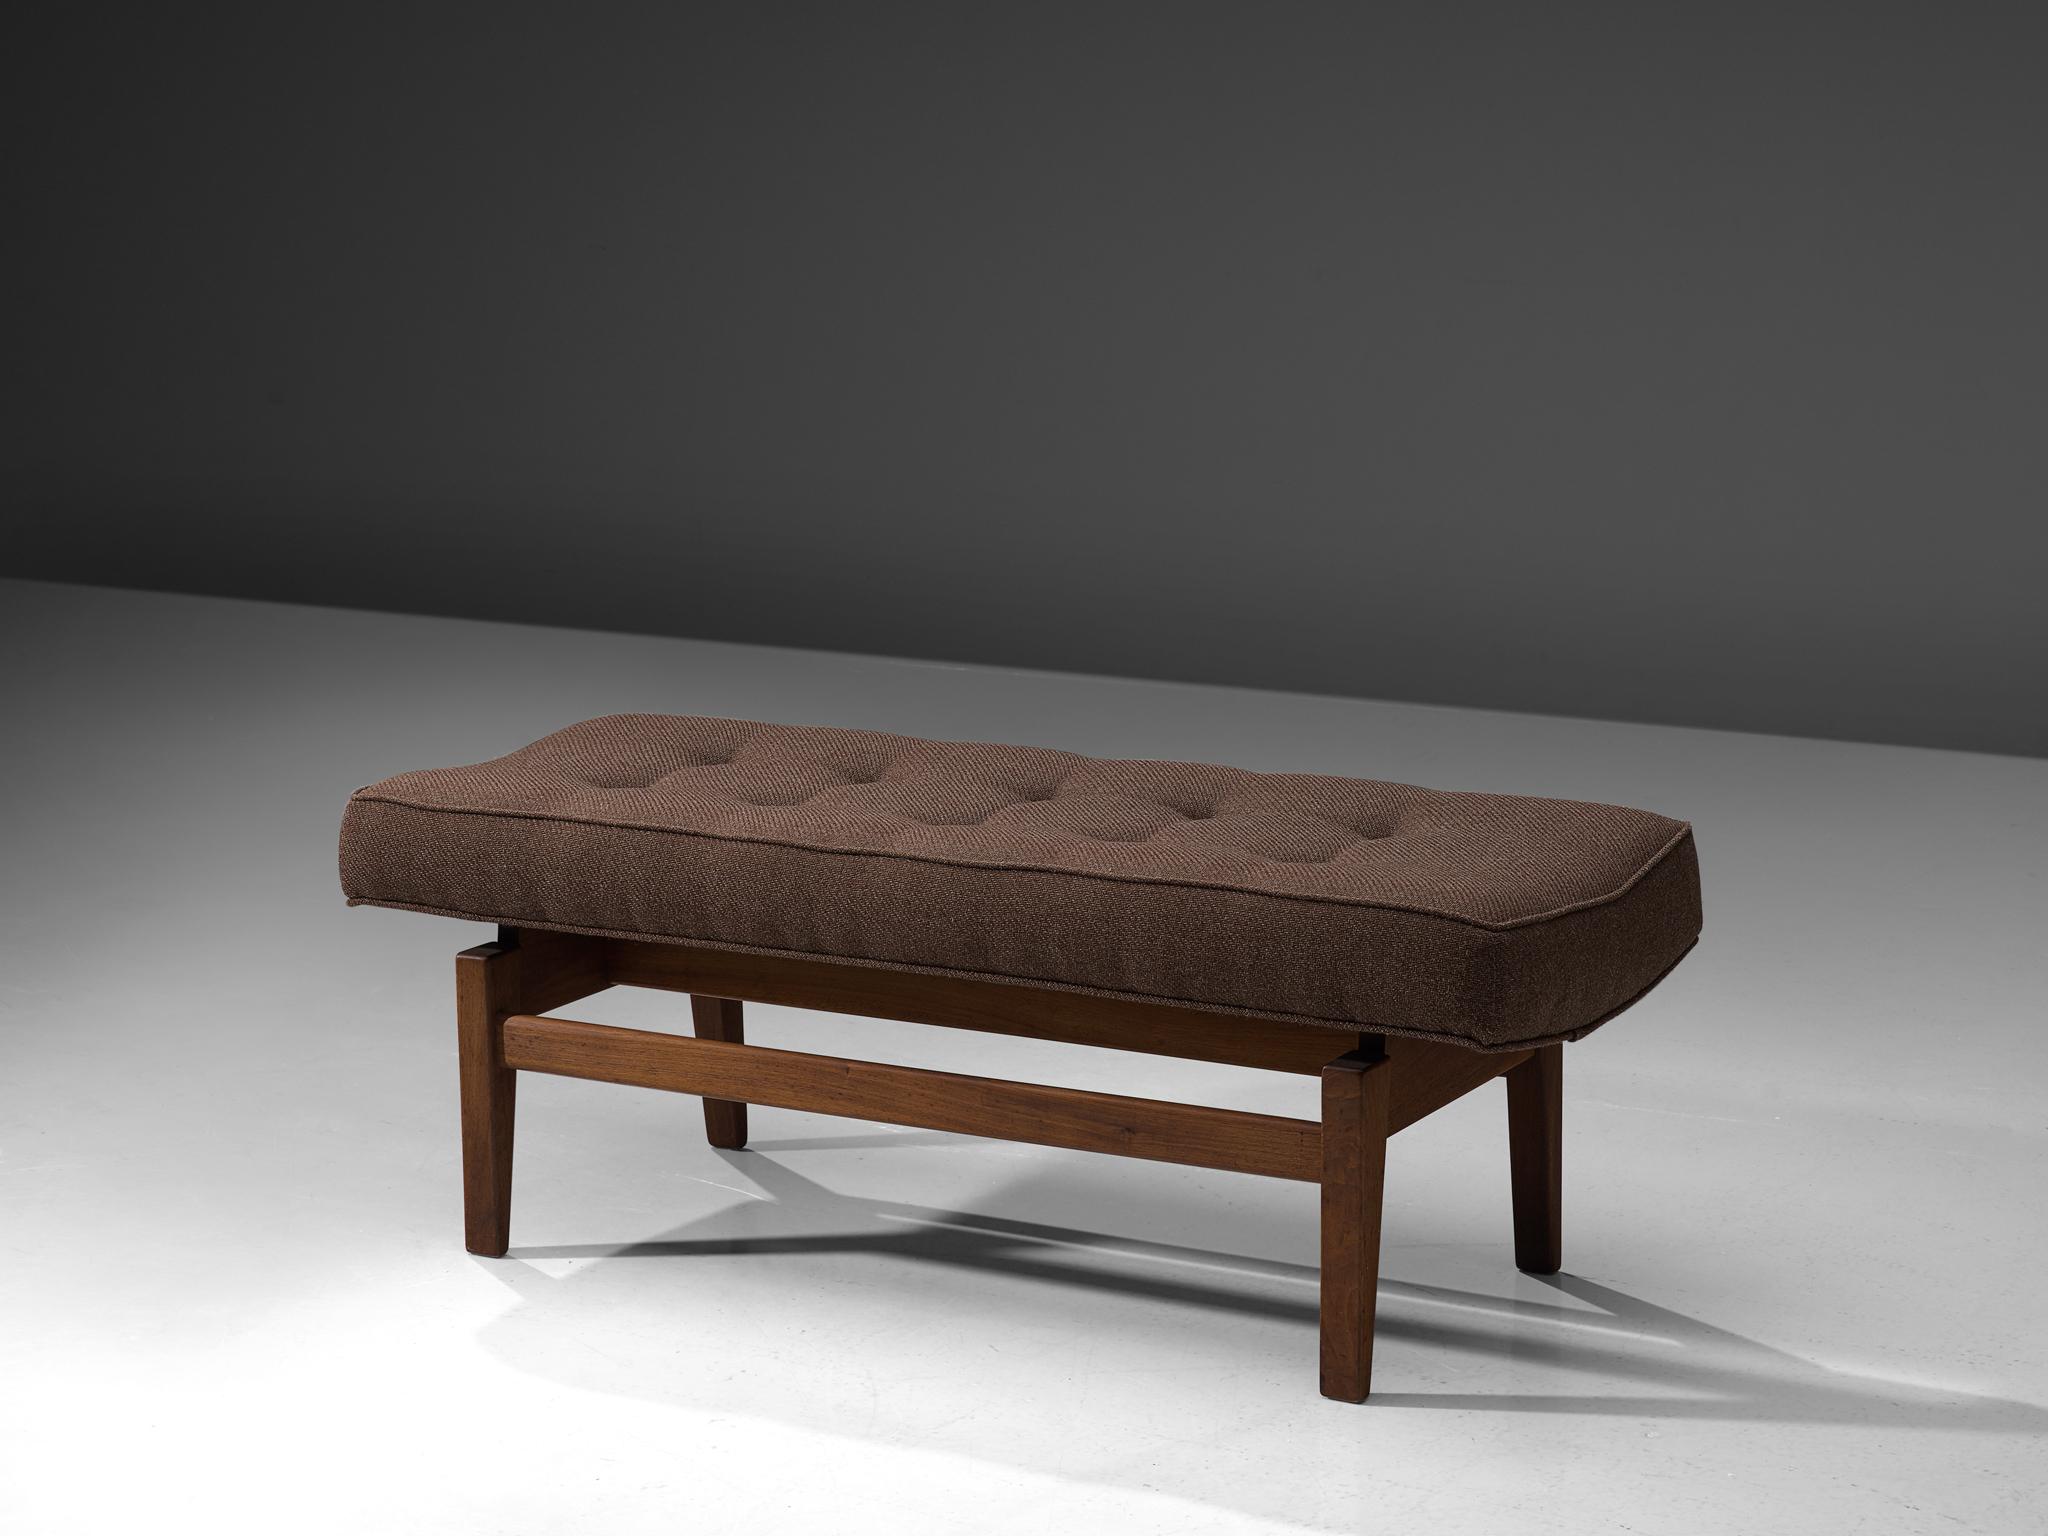 Jens Risom bench in solid walnut and brown fabric, USA, 1960s

This small bench by Risom is well crafted in walnut, with an open frame. This brown woolen fabric is in great condition. 
The modesty of the design is characteristic for the work of